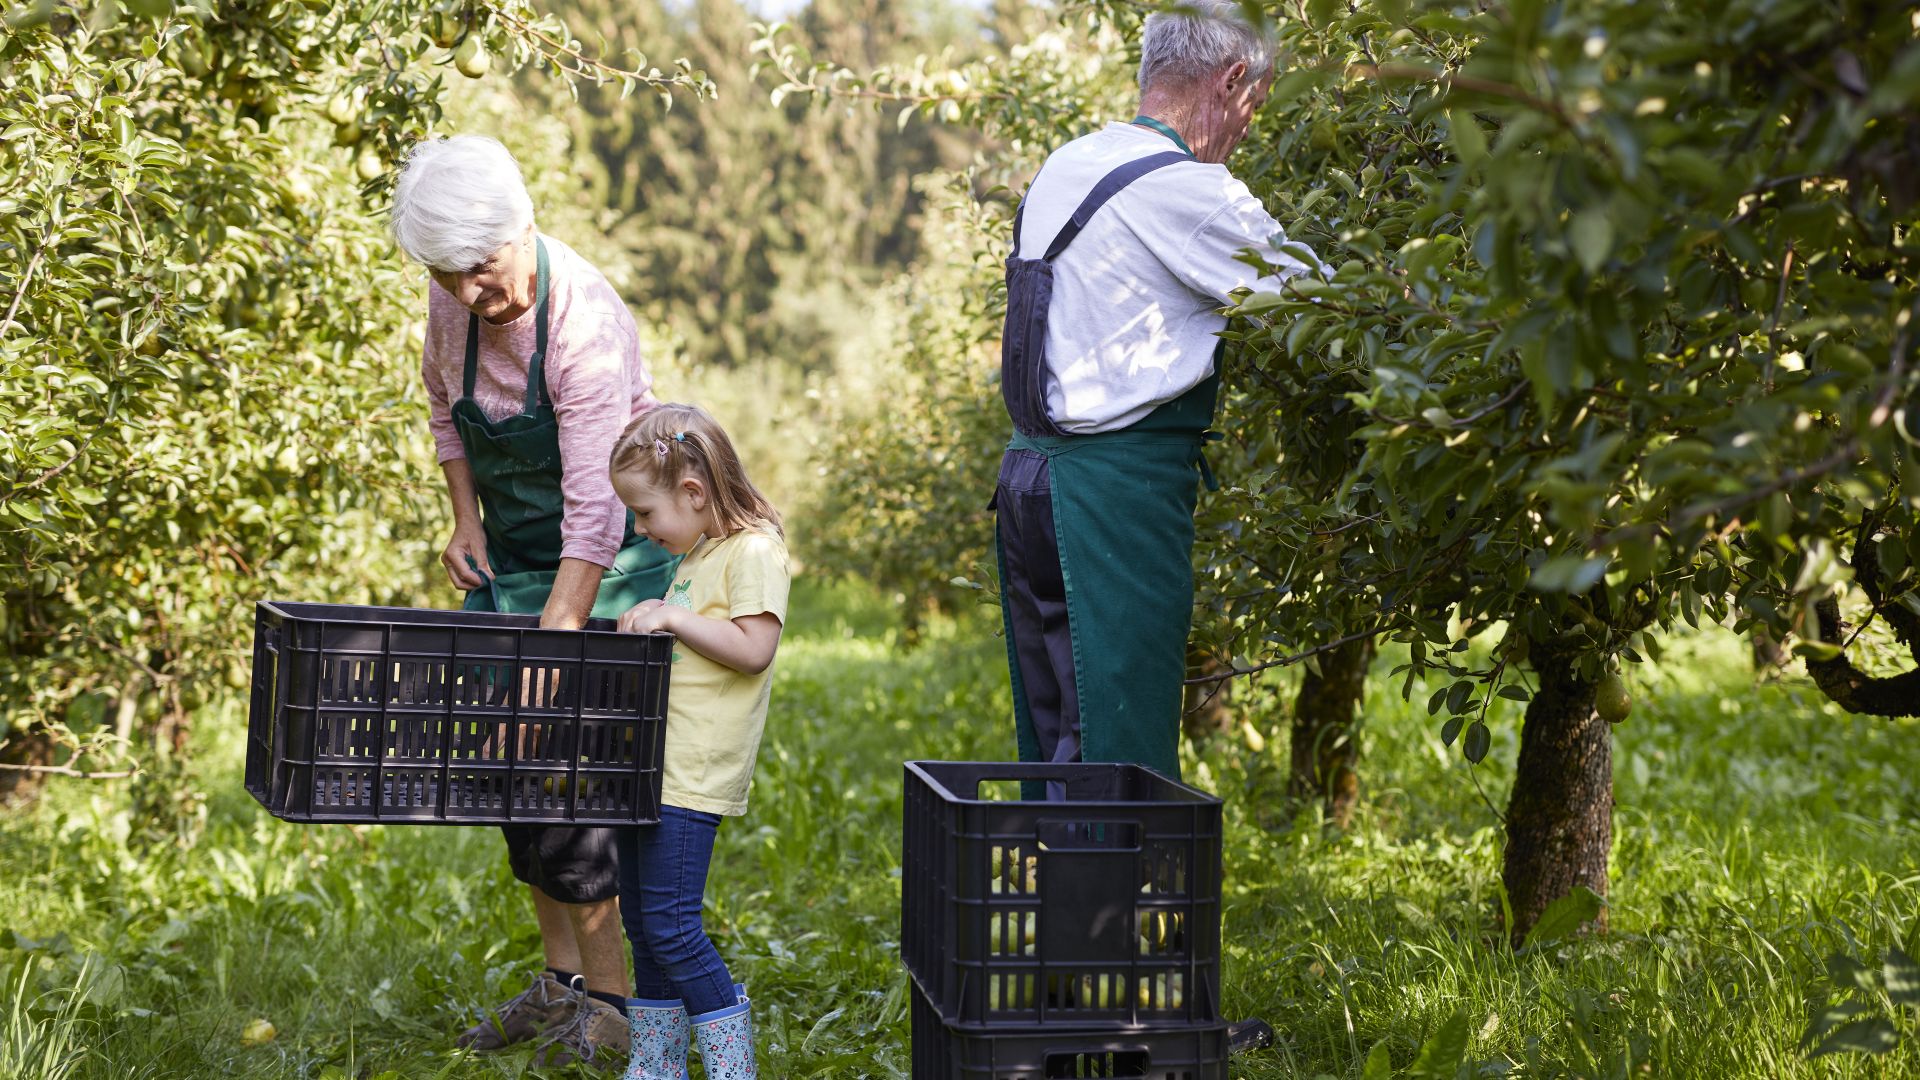 Baden-Württemberg: Girl harvests pears with grandparents on organic farm